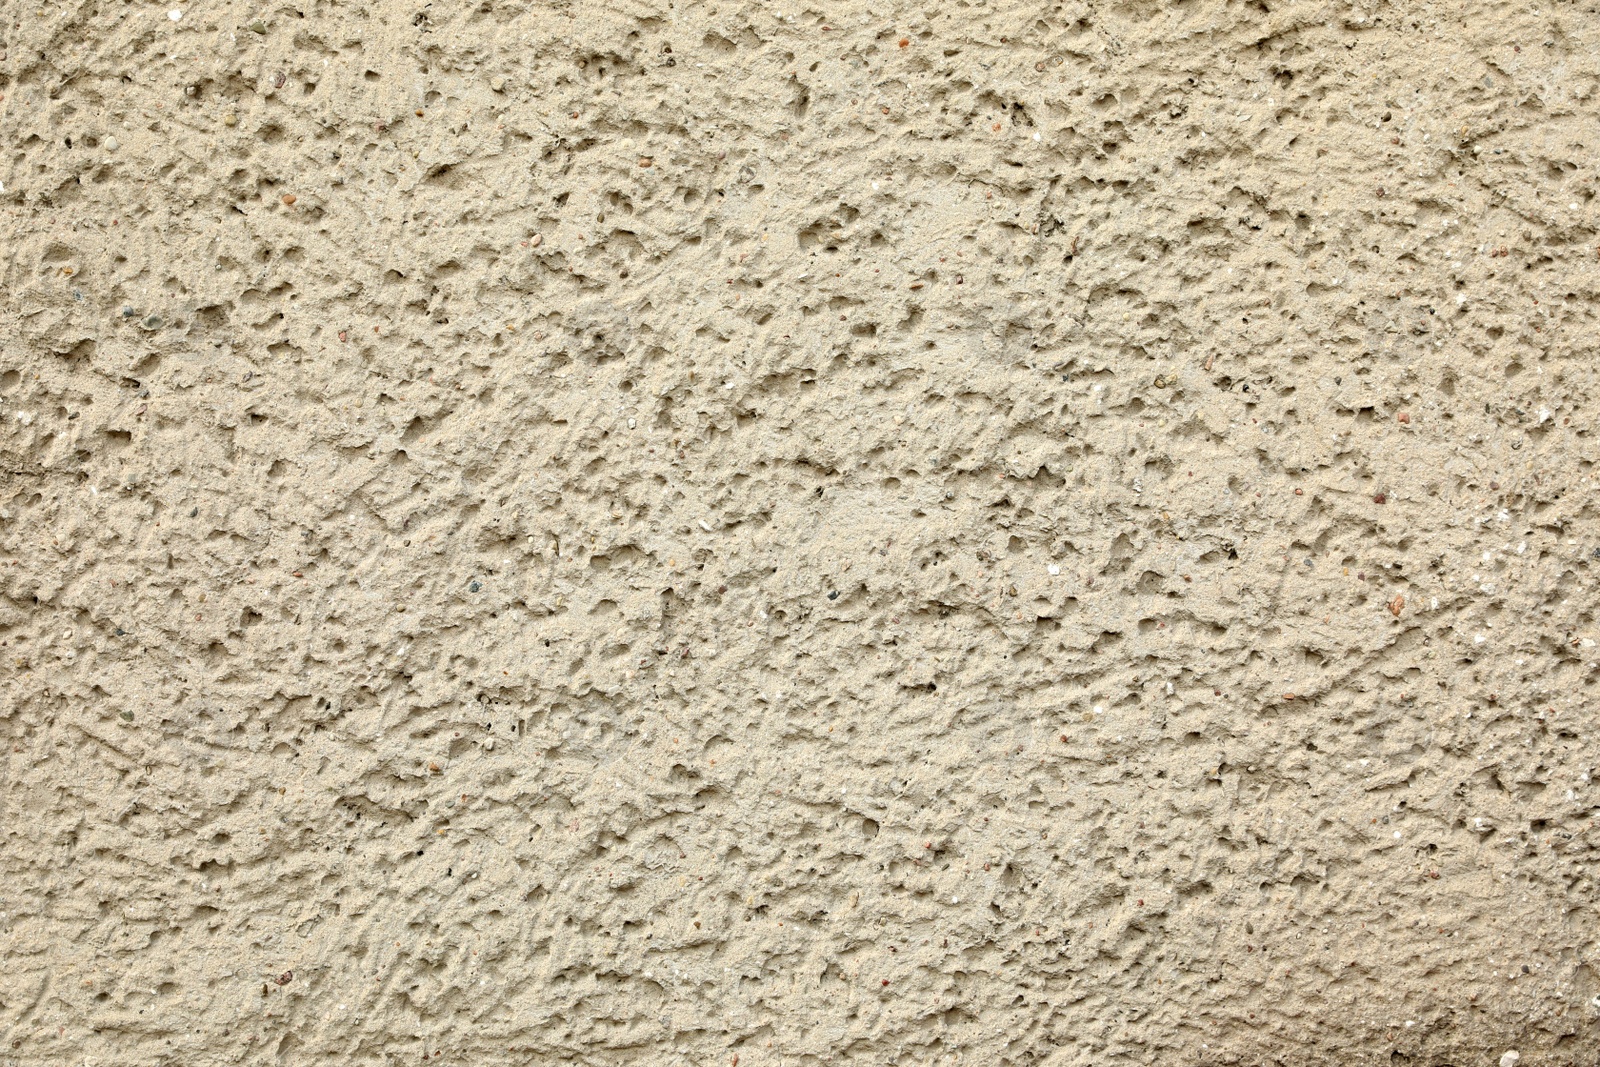 Photo of Texture of beige plaster wall as background